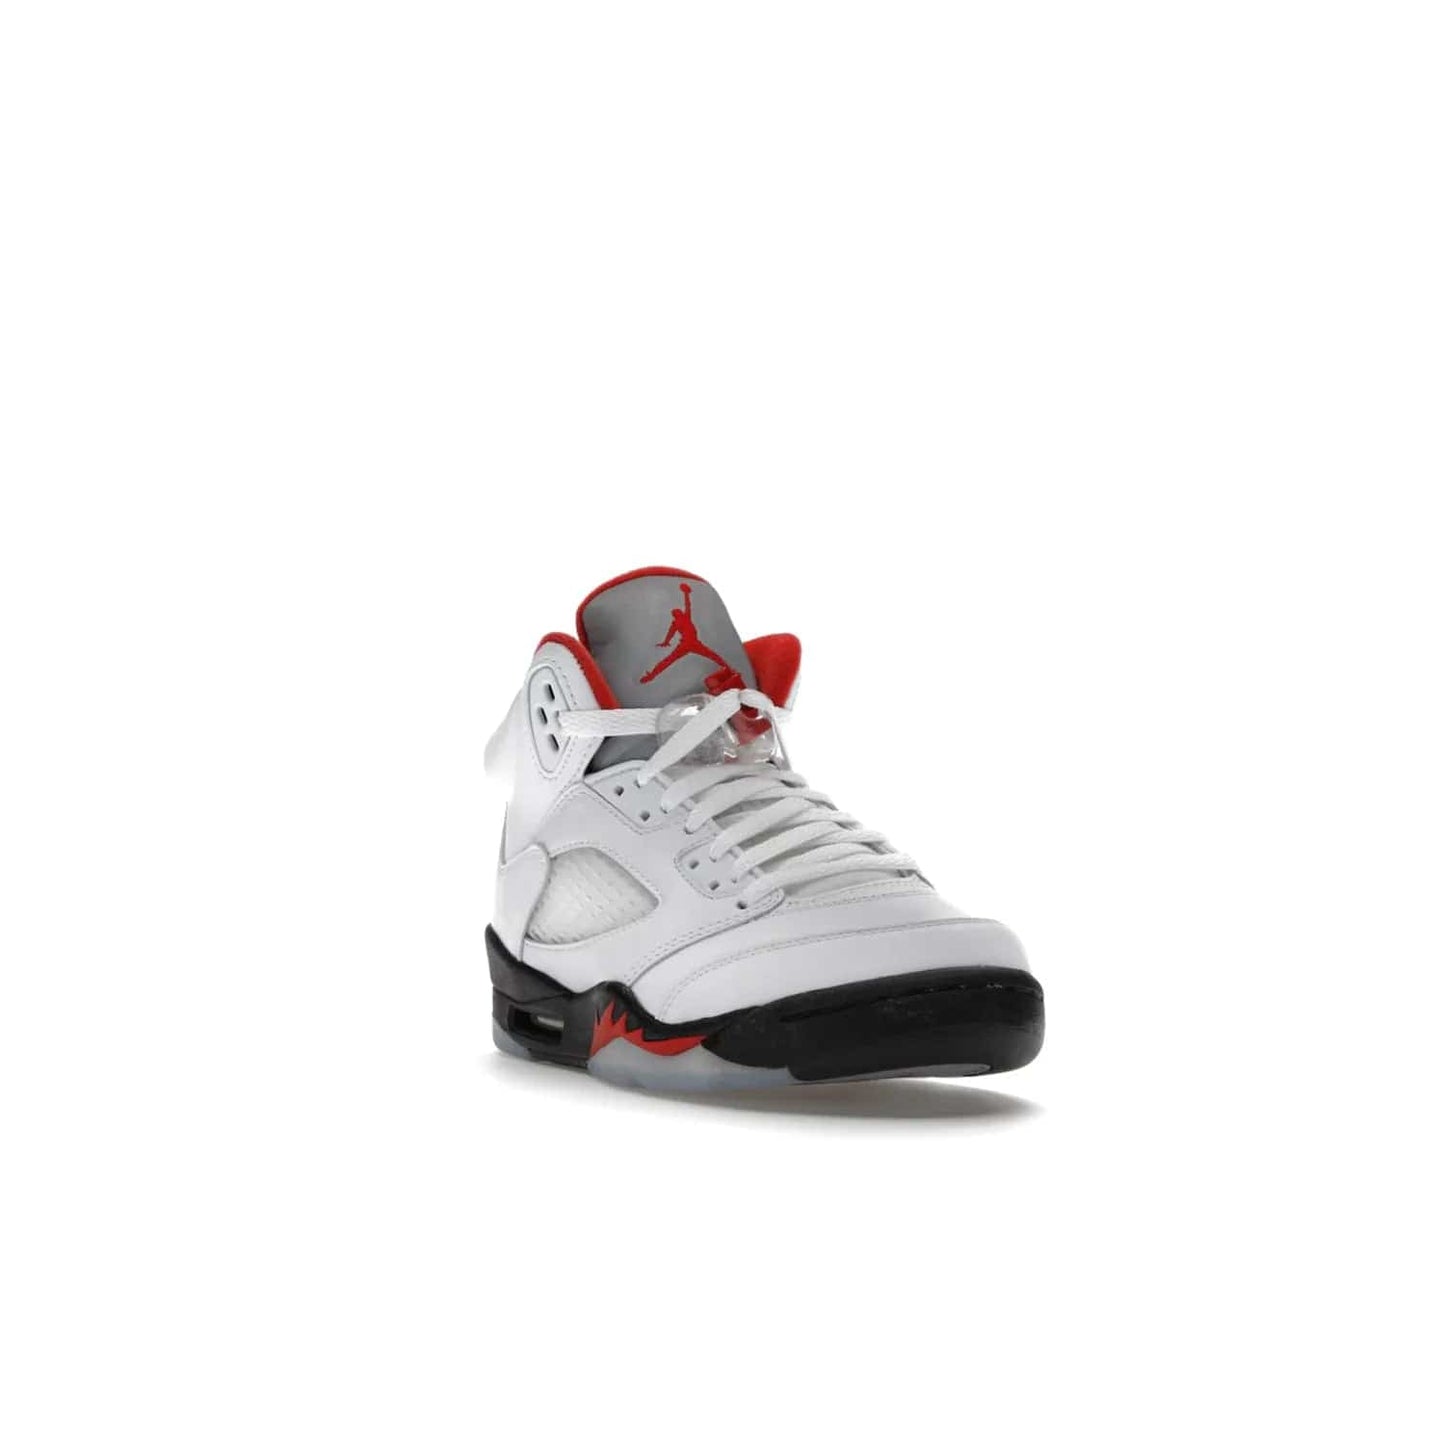 Jordan 5 Retro Fire Red Silver Tongue (2020) (GS) - Image 7 - Only at www.BallersClubKickz.com - A stylish option for any grade schooler. The Air Jordan 5 Retro Fire Red Silver Tongue 2020 GS features a combination of four hues, premium white leather, a clear mesh mid-upper and a reflective silver tongue. An icy translucent blue outsole completes the look. Available on May 2, $150.